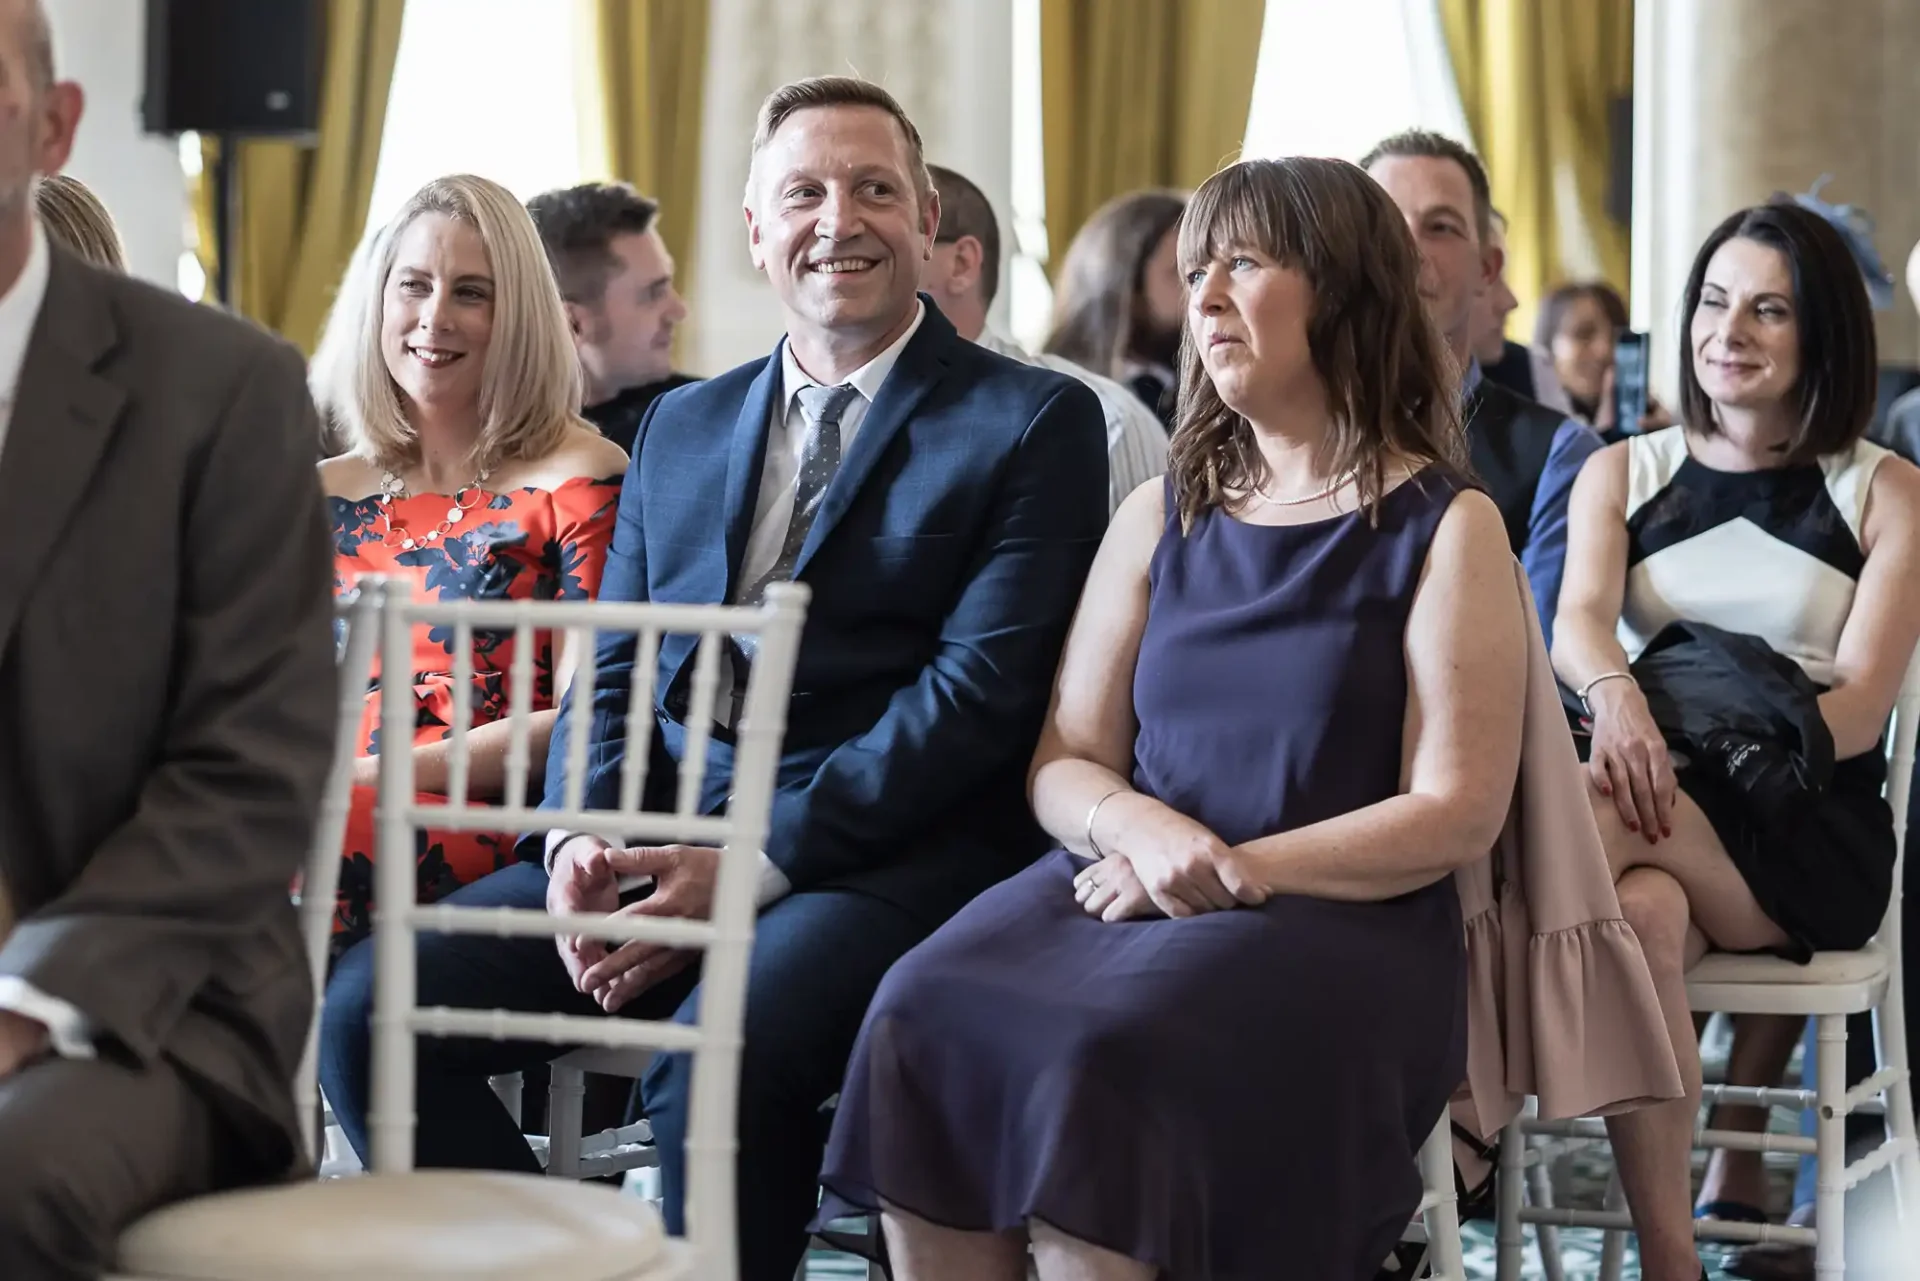 Audience members seated at an event, smiling and focused on the front, in a venue with elegant decor.